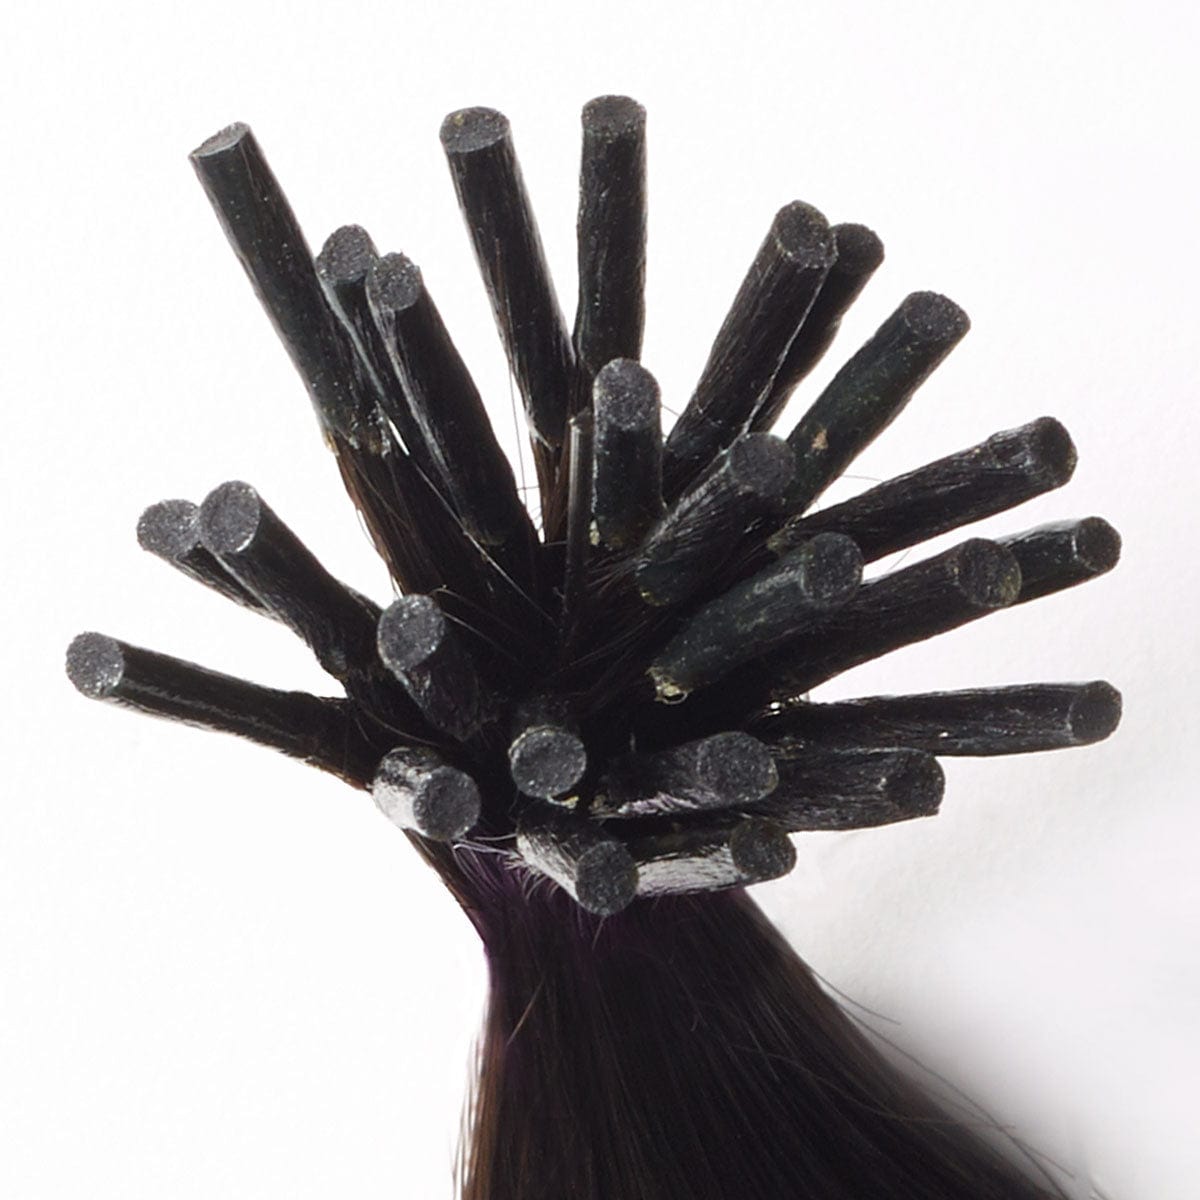 4 x Straight Fusion I-Tip Hair Extension Bundle Deal